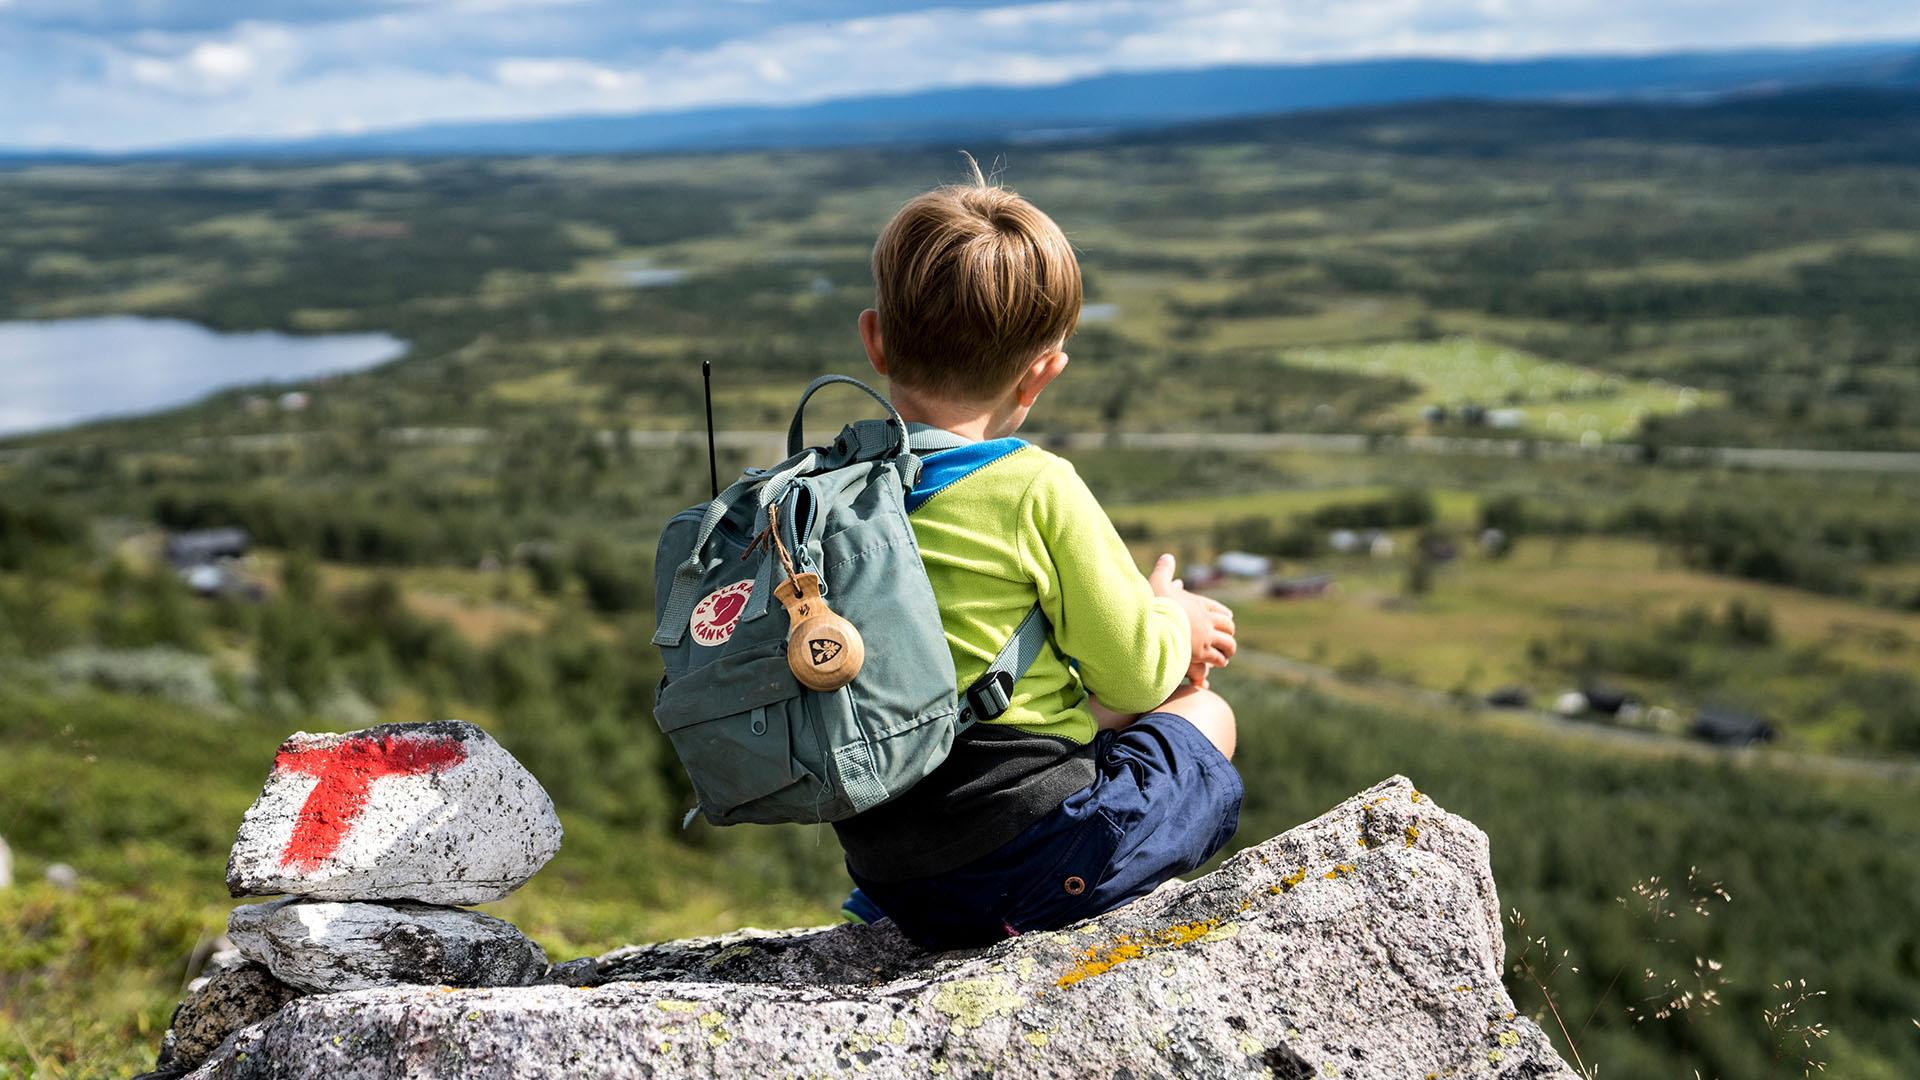 A boy with a small backpack sits on a rock with a hiking trail marking and looks out over a large plateau with a lake and many mountain farms.